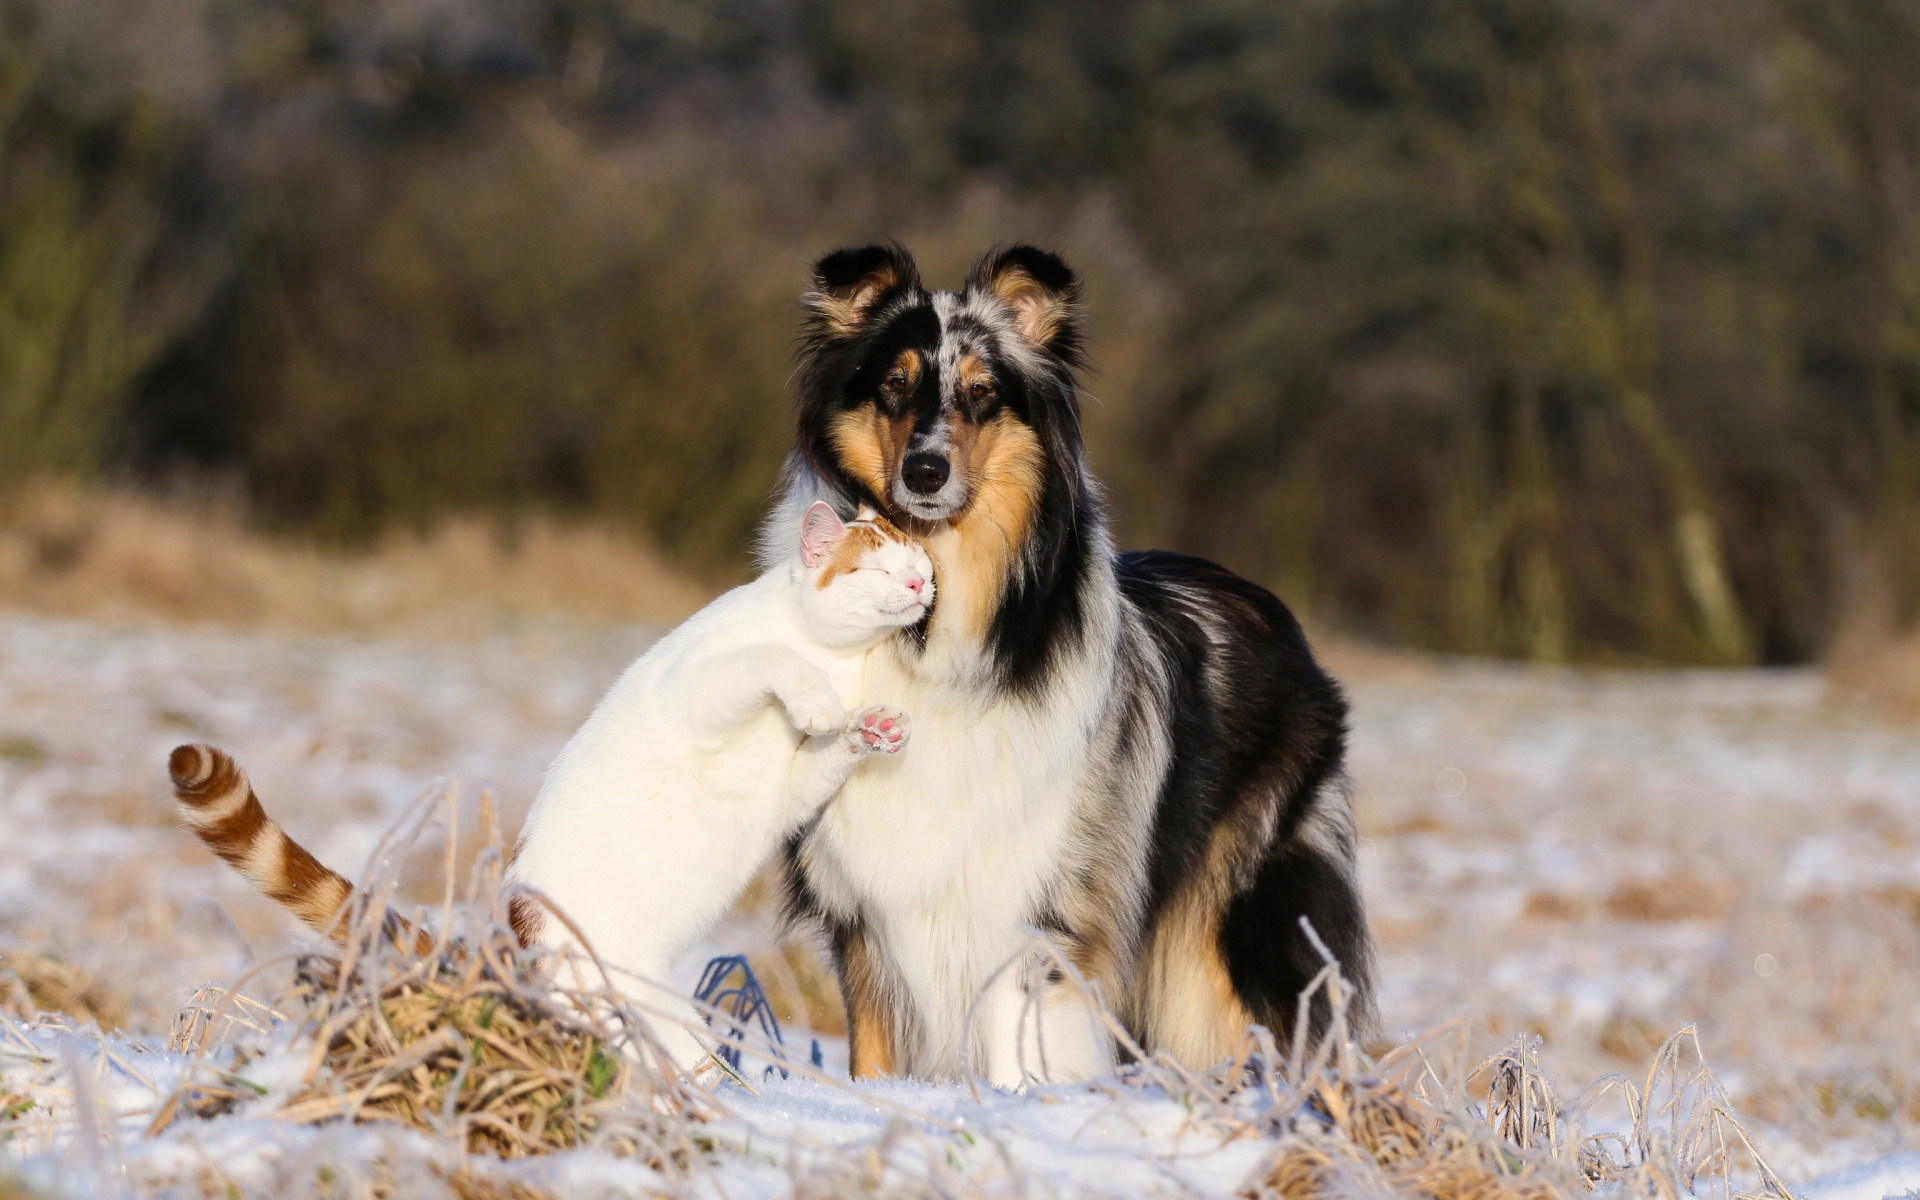 Friendship Cat and Dog Collie wallpaper 1920x1200